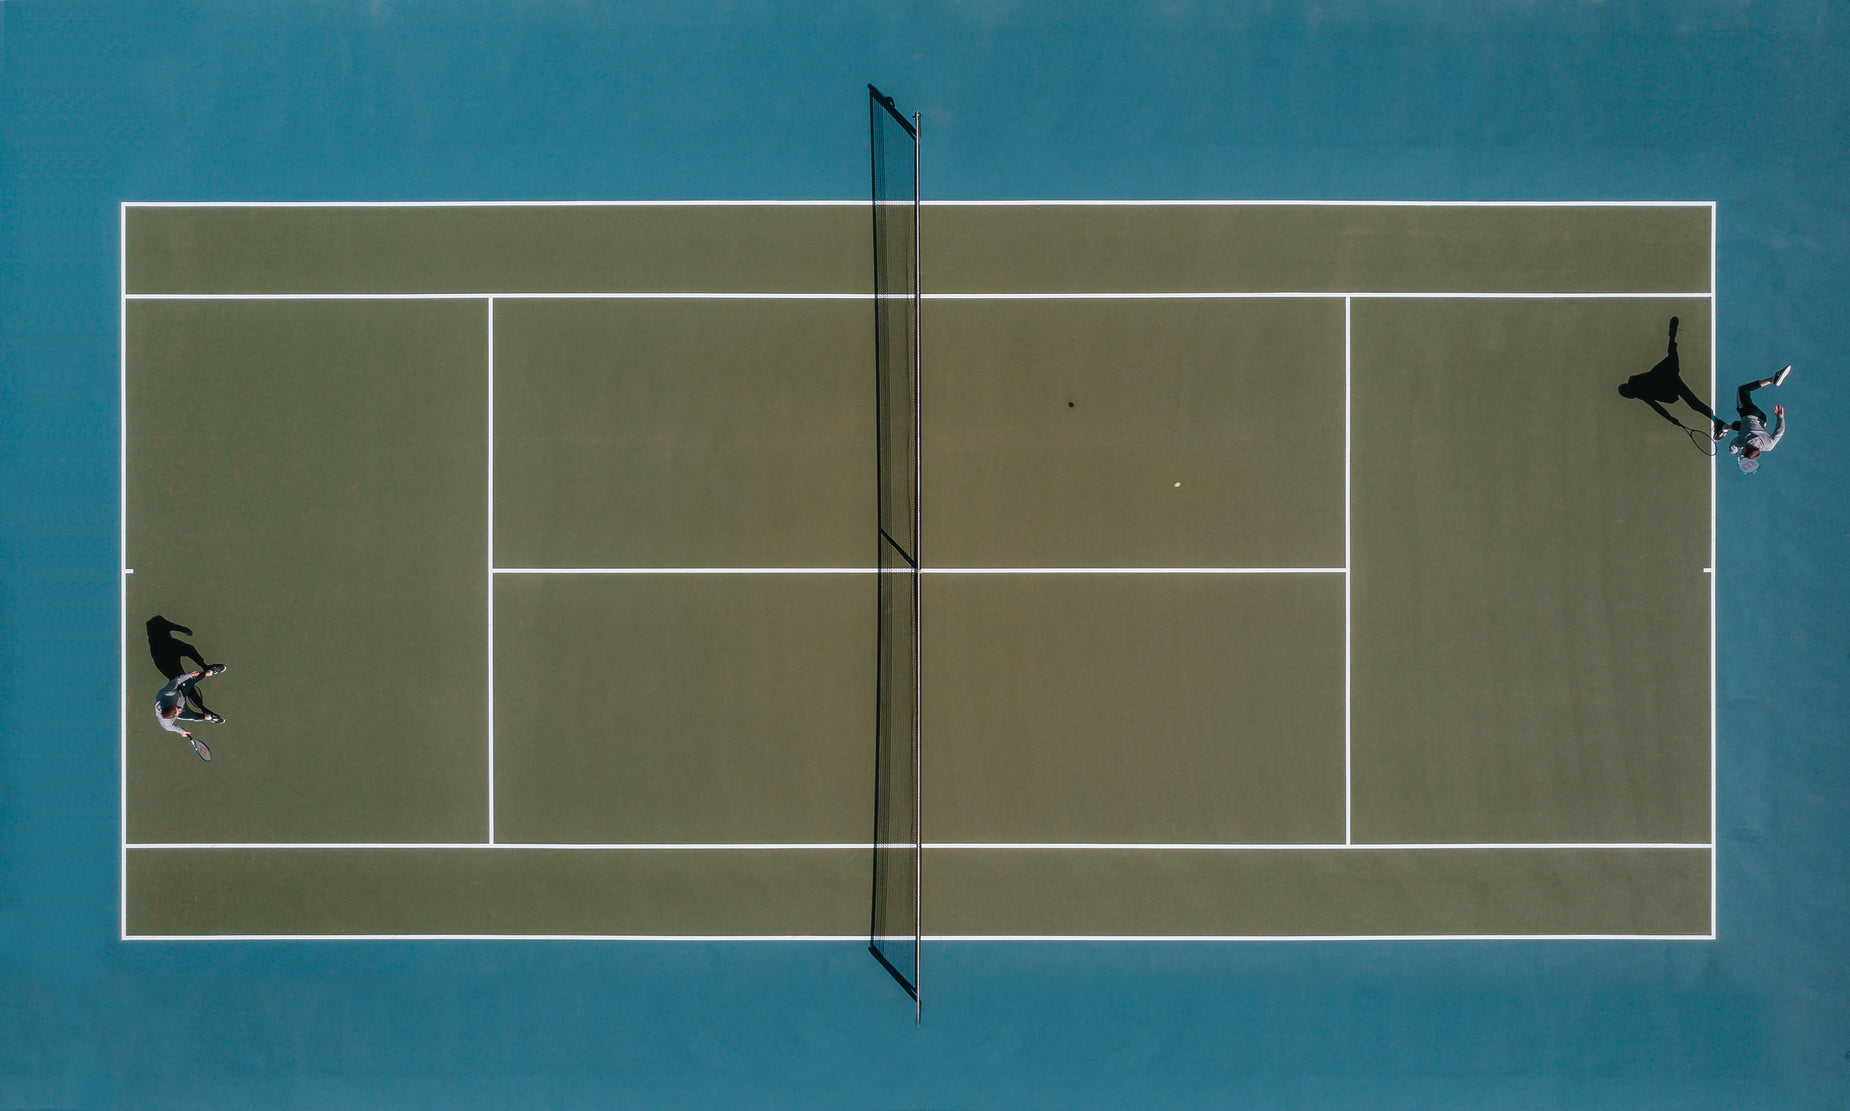 Browse Free HD Images of Aerial View Of Two People Playing Tennis In ...